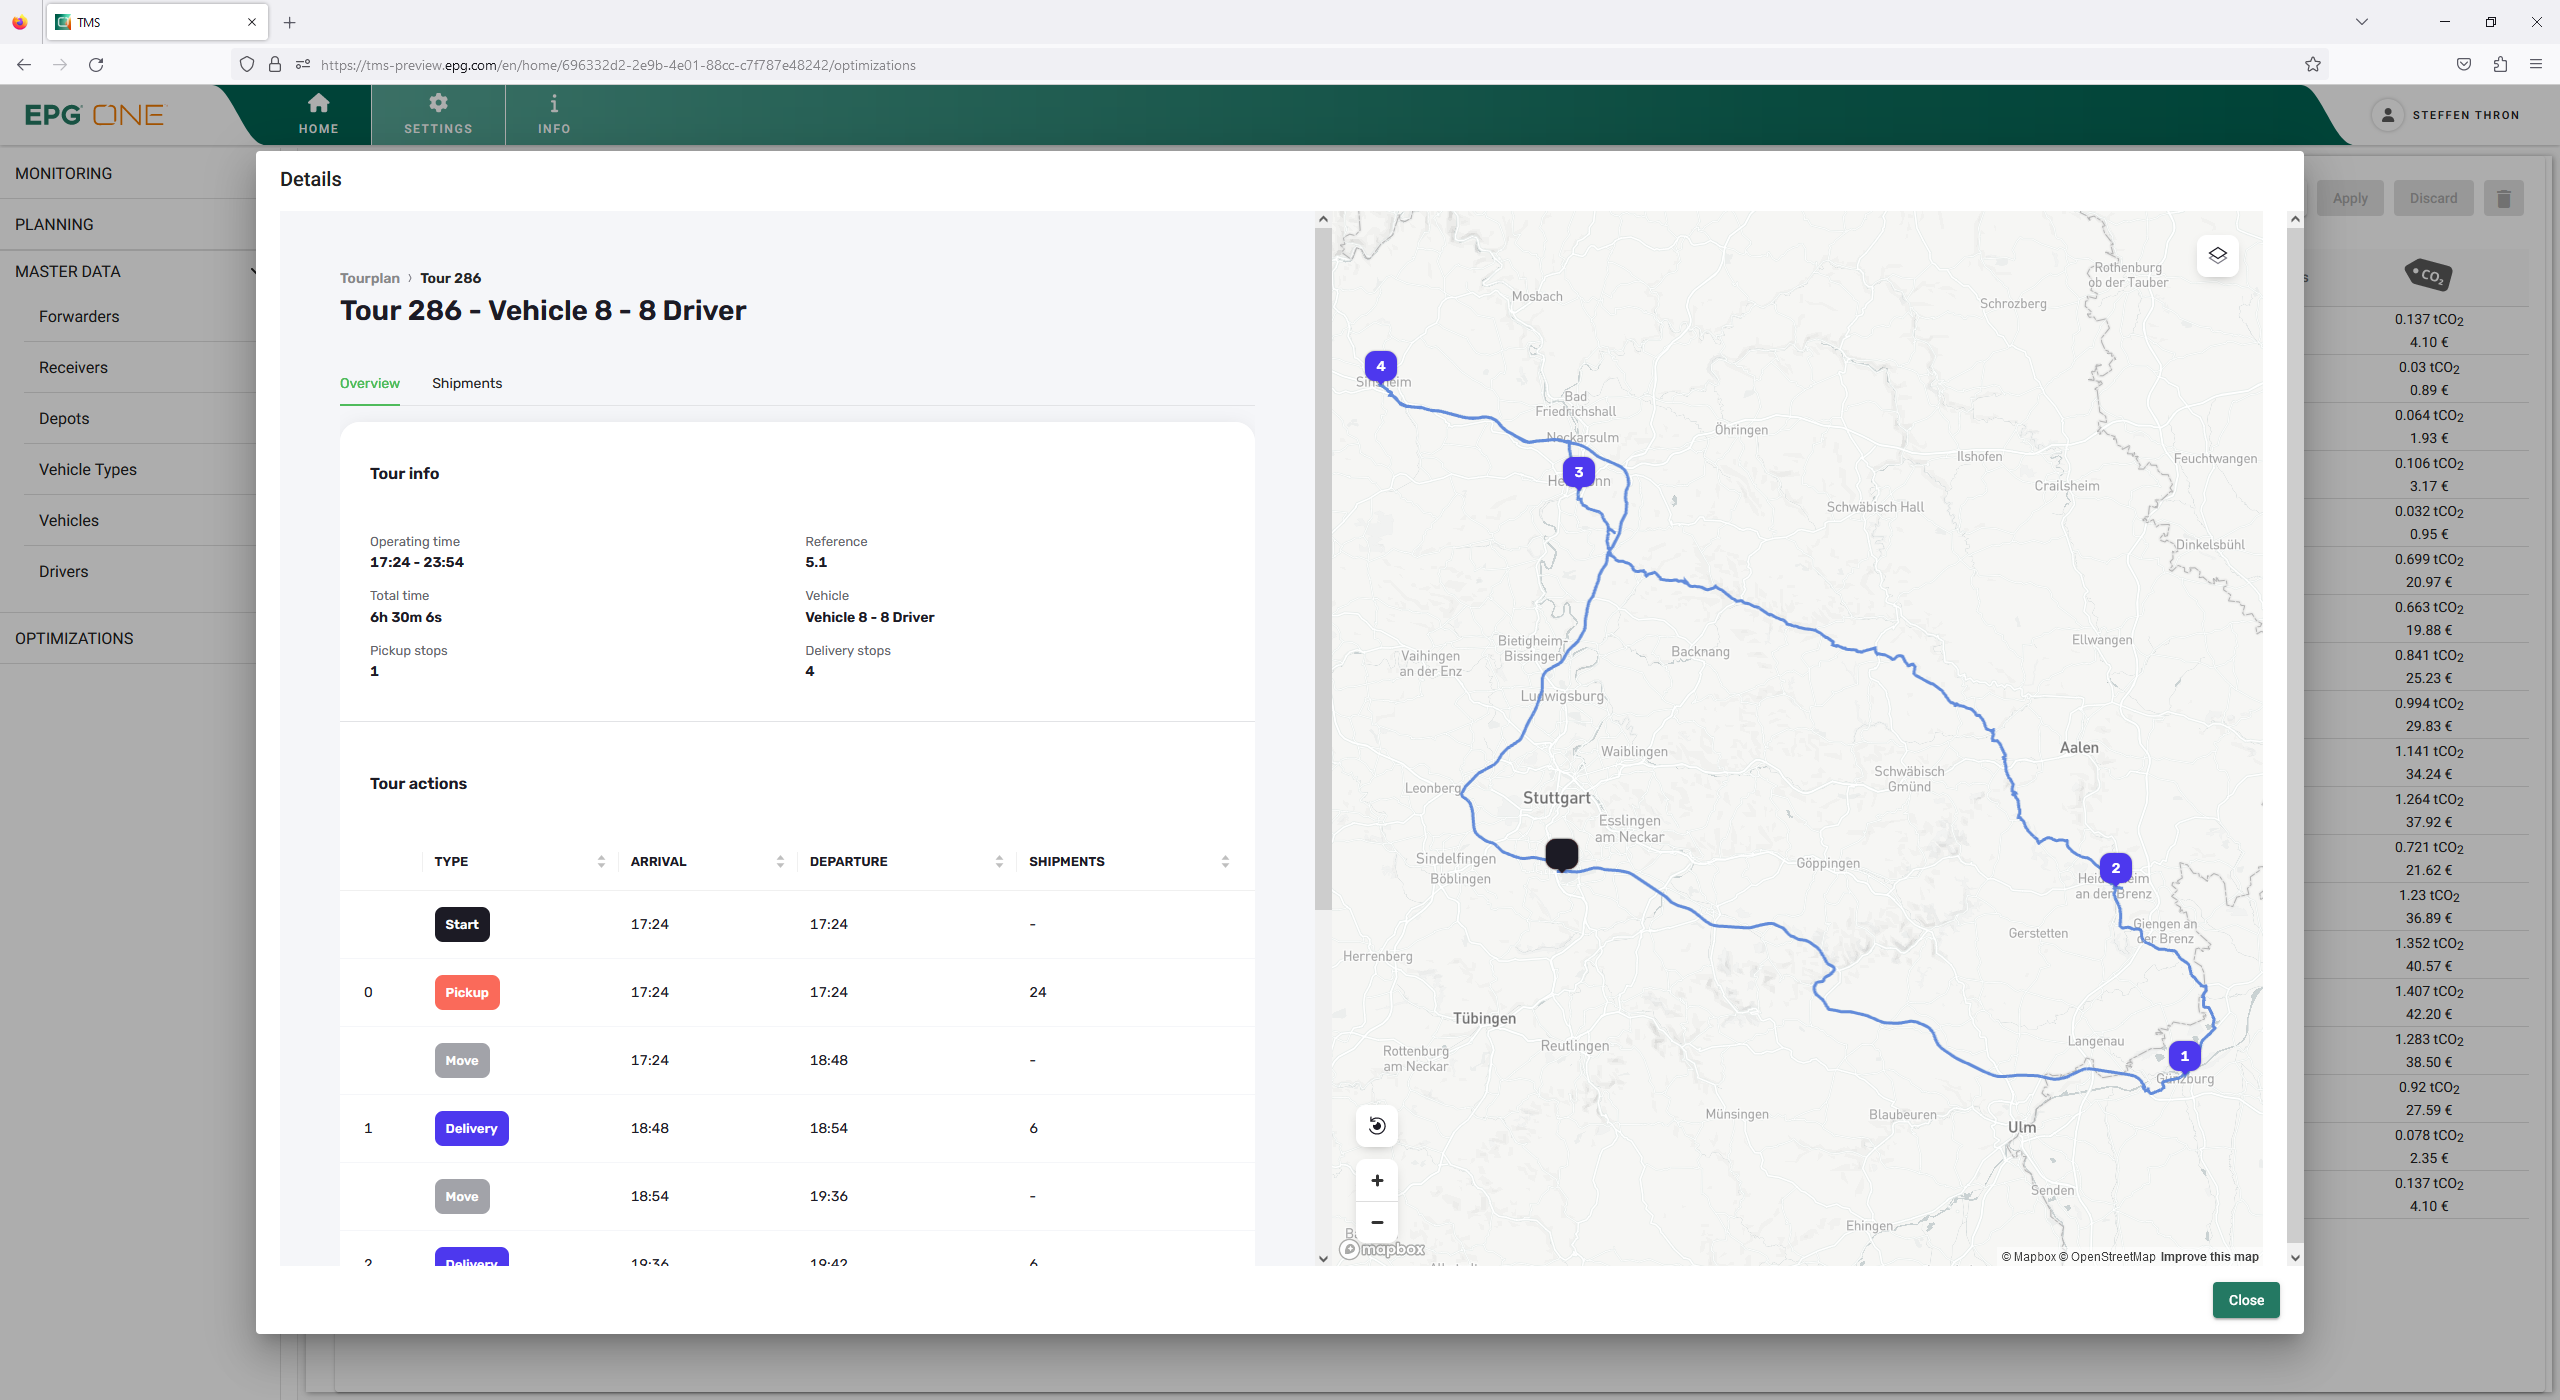 From the overall calculated tour plan, a single vehicle/tour can be selected. It provides an overview of the planned route for a single vehicle on the map, and displays all the actions the driver must perform in the planned sequence & corresponding times